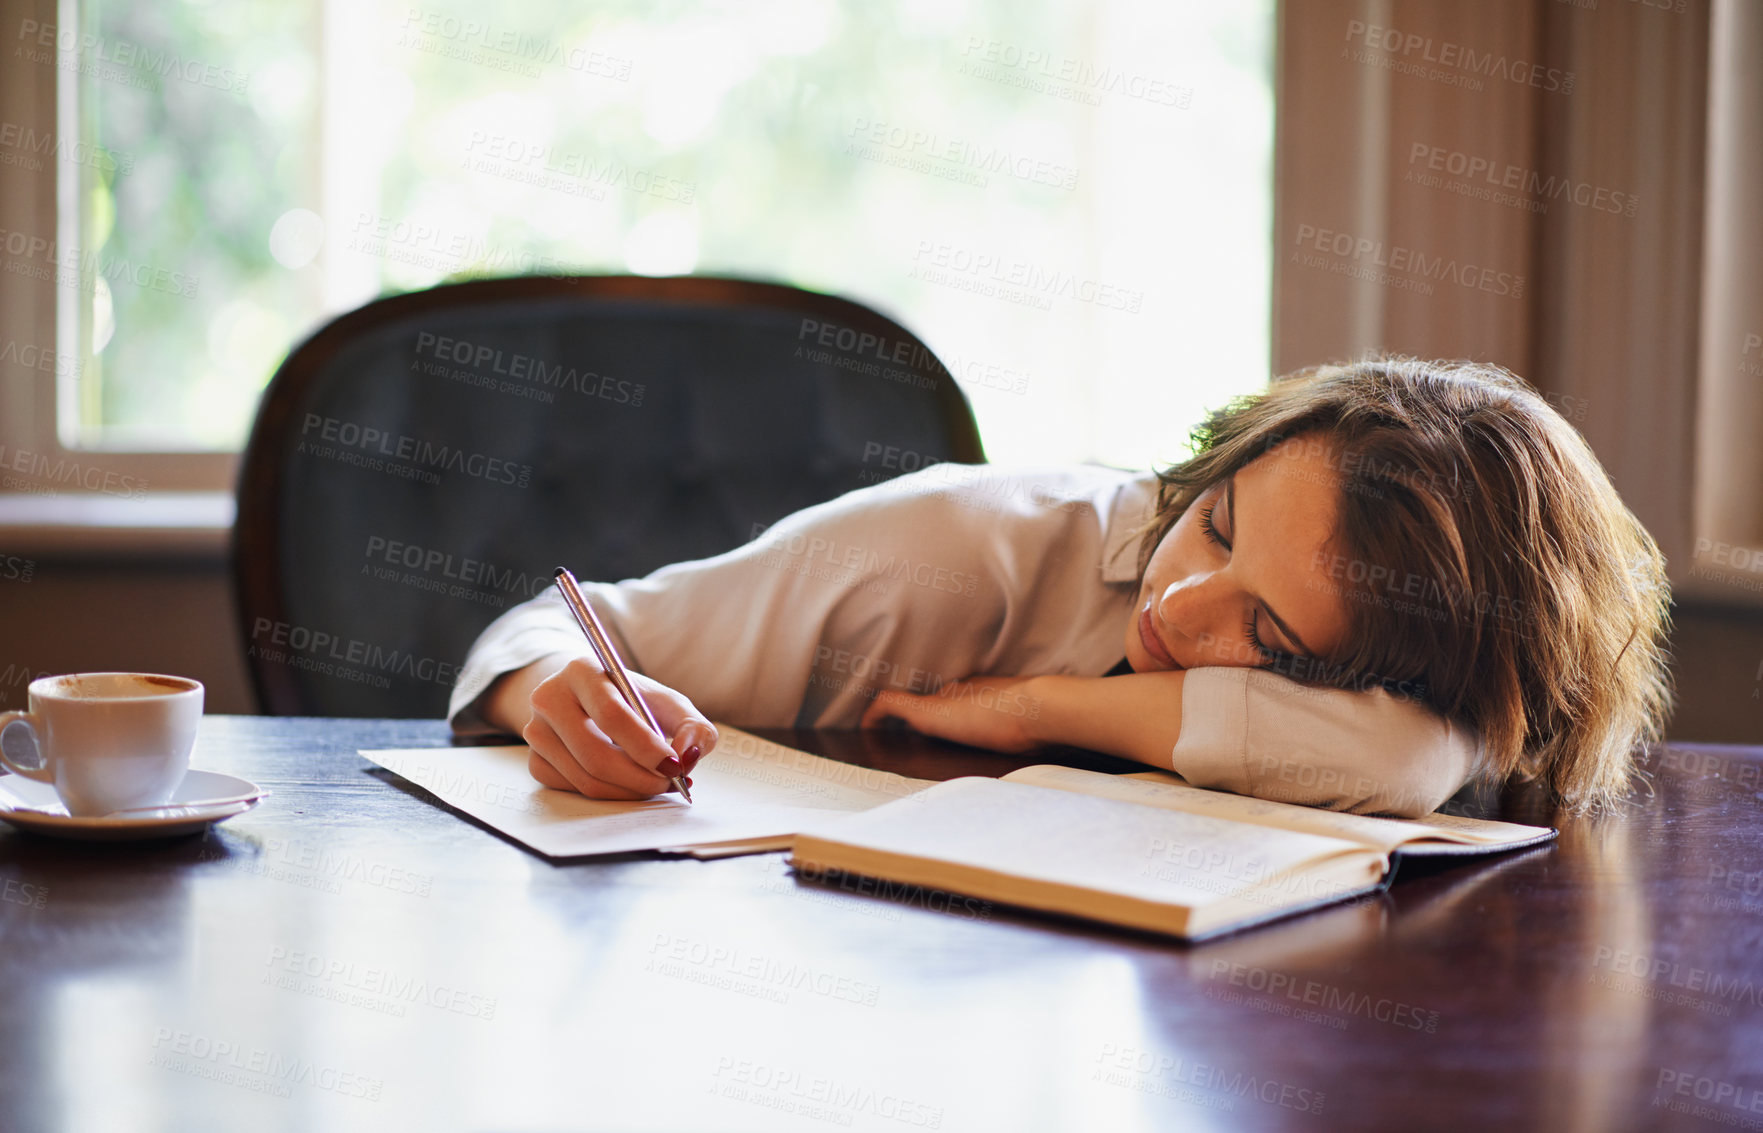 Buy stock photo Remote work, sleeping and tired woman with books, fatigue or snooze while writing in home office. Freelance, burnout or female writer with pen in a house exhausted by reading, research or novel notes